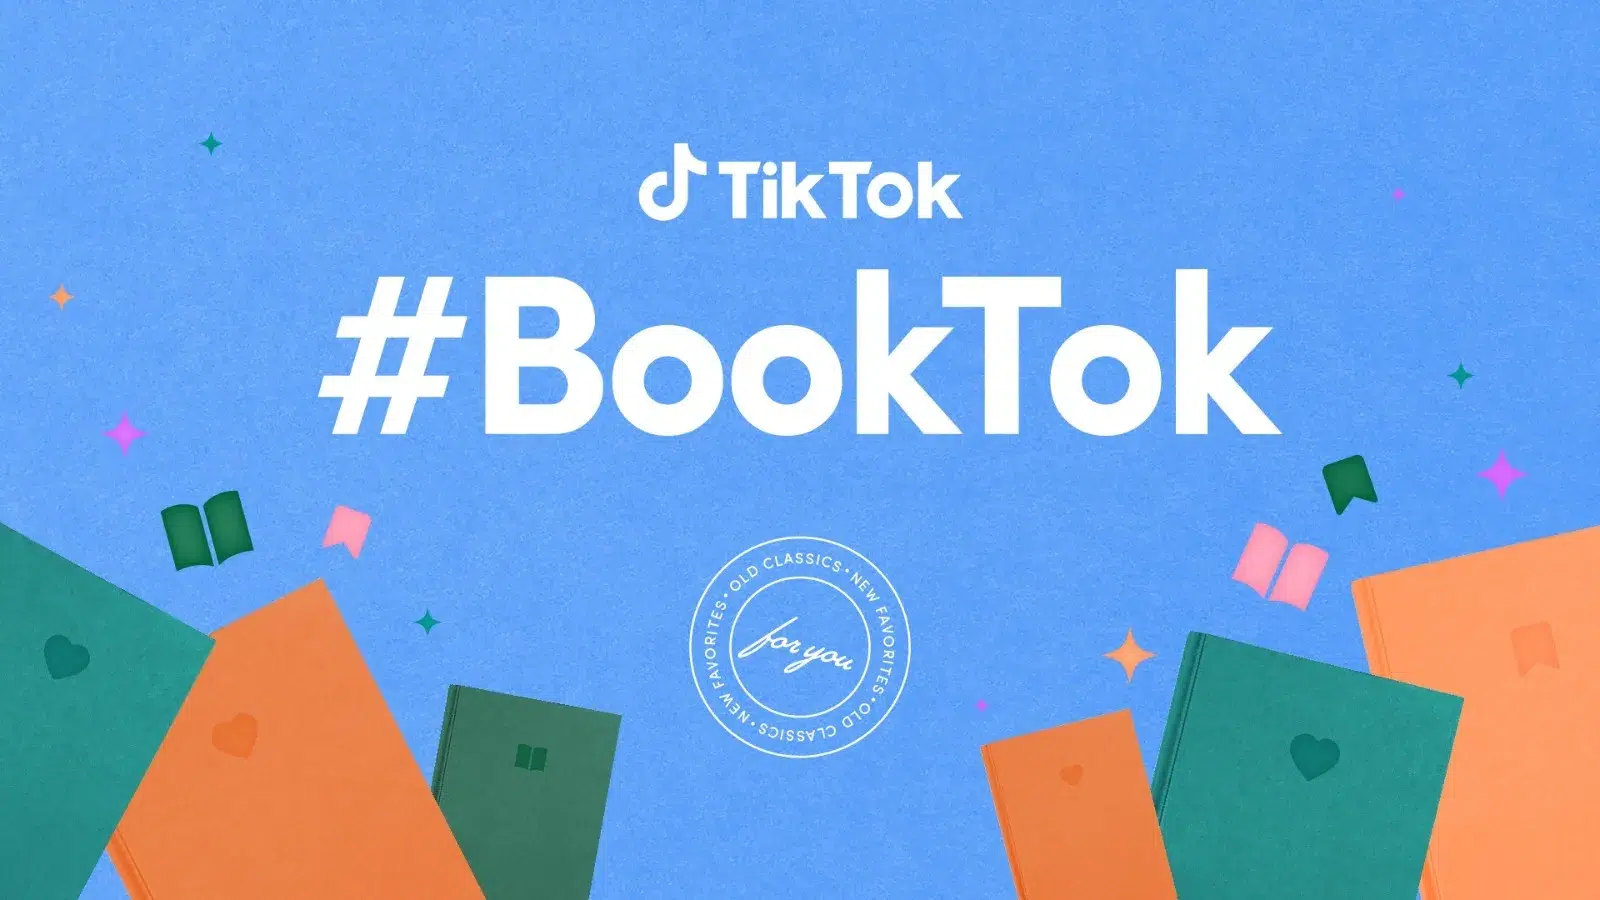 BookTok hashtag has garnered over 29 million videos created by reading enthusiasts globally.